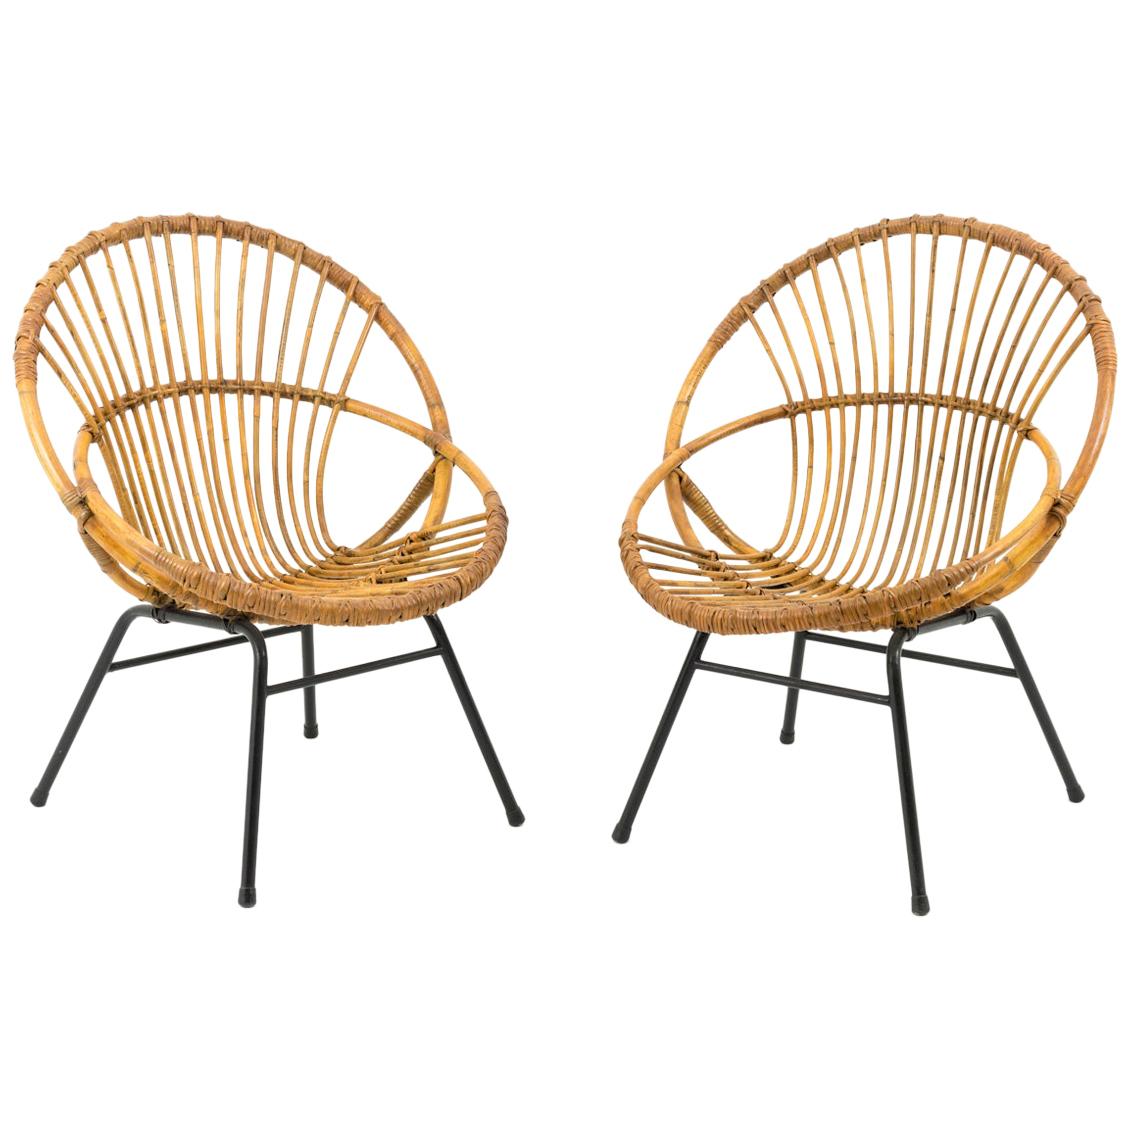 Pair of Wicker and Metal Armchairs, Shell Shape, 1960s